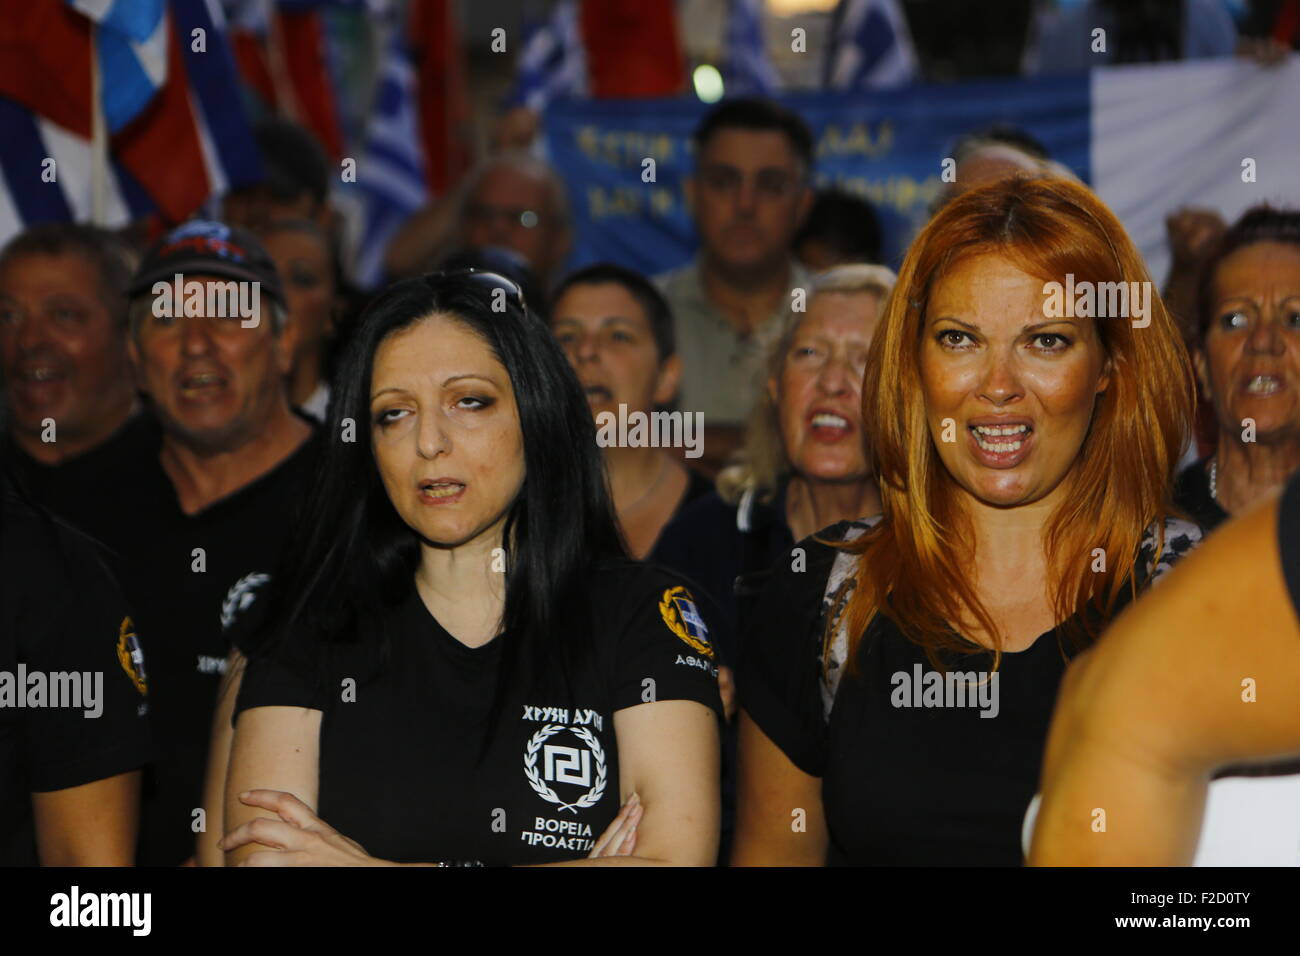 Athens, Greece. 16th September 2015. Golden Dawn supporter shout slogans at the election rally in Athens. Greek right wing  party Golden Dawn held an election rally in Athens, four days ahead of election day. The party hopes to gain enough seats in the election to become the third latest party in the Greek Parliament. Credit:  Michael Debets/Alamy Live News Stock Photo